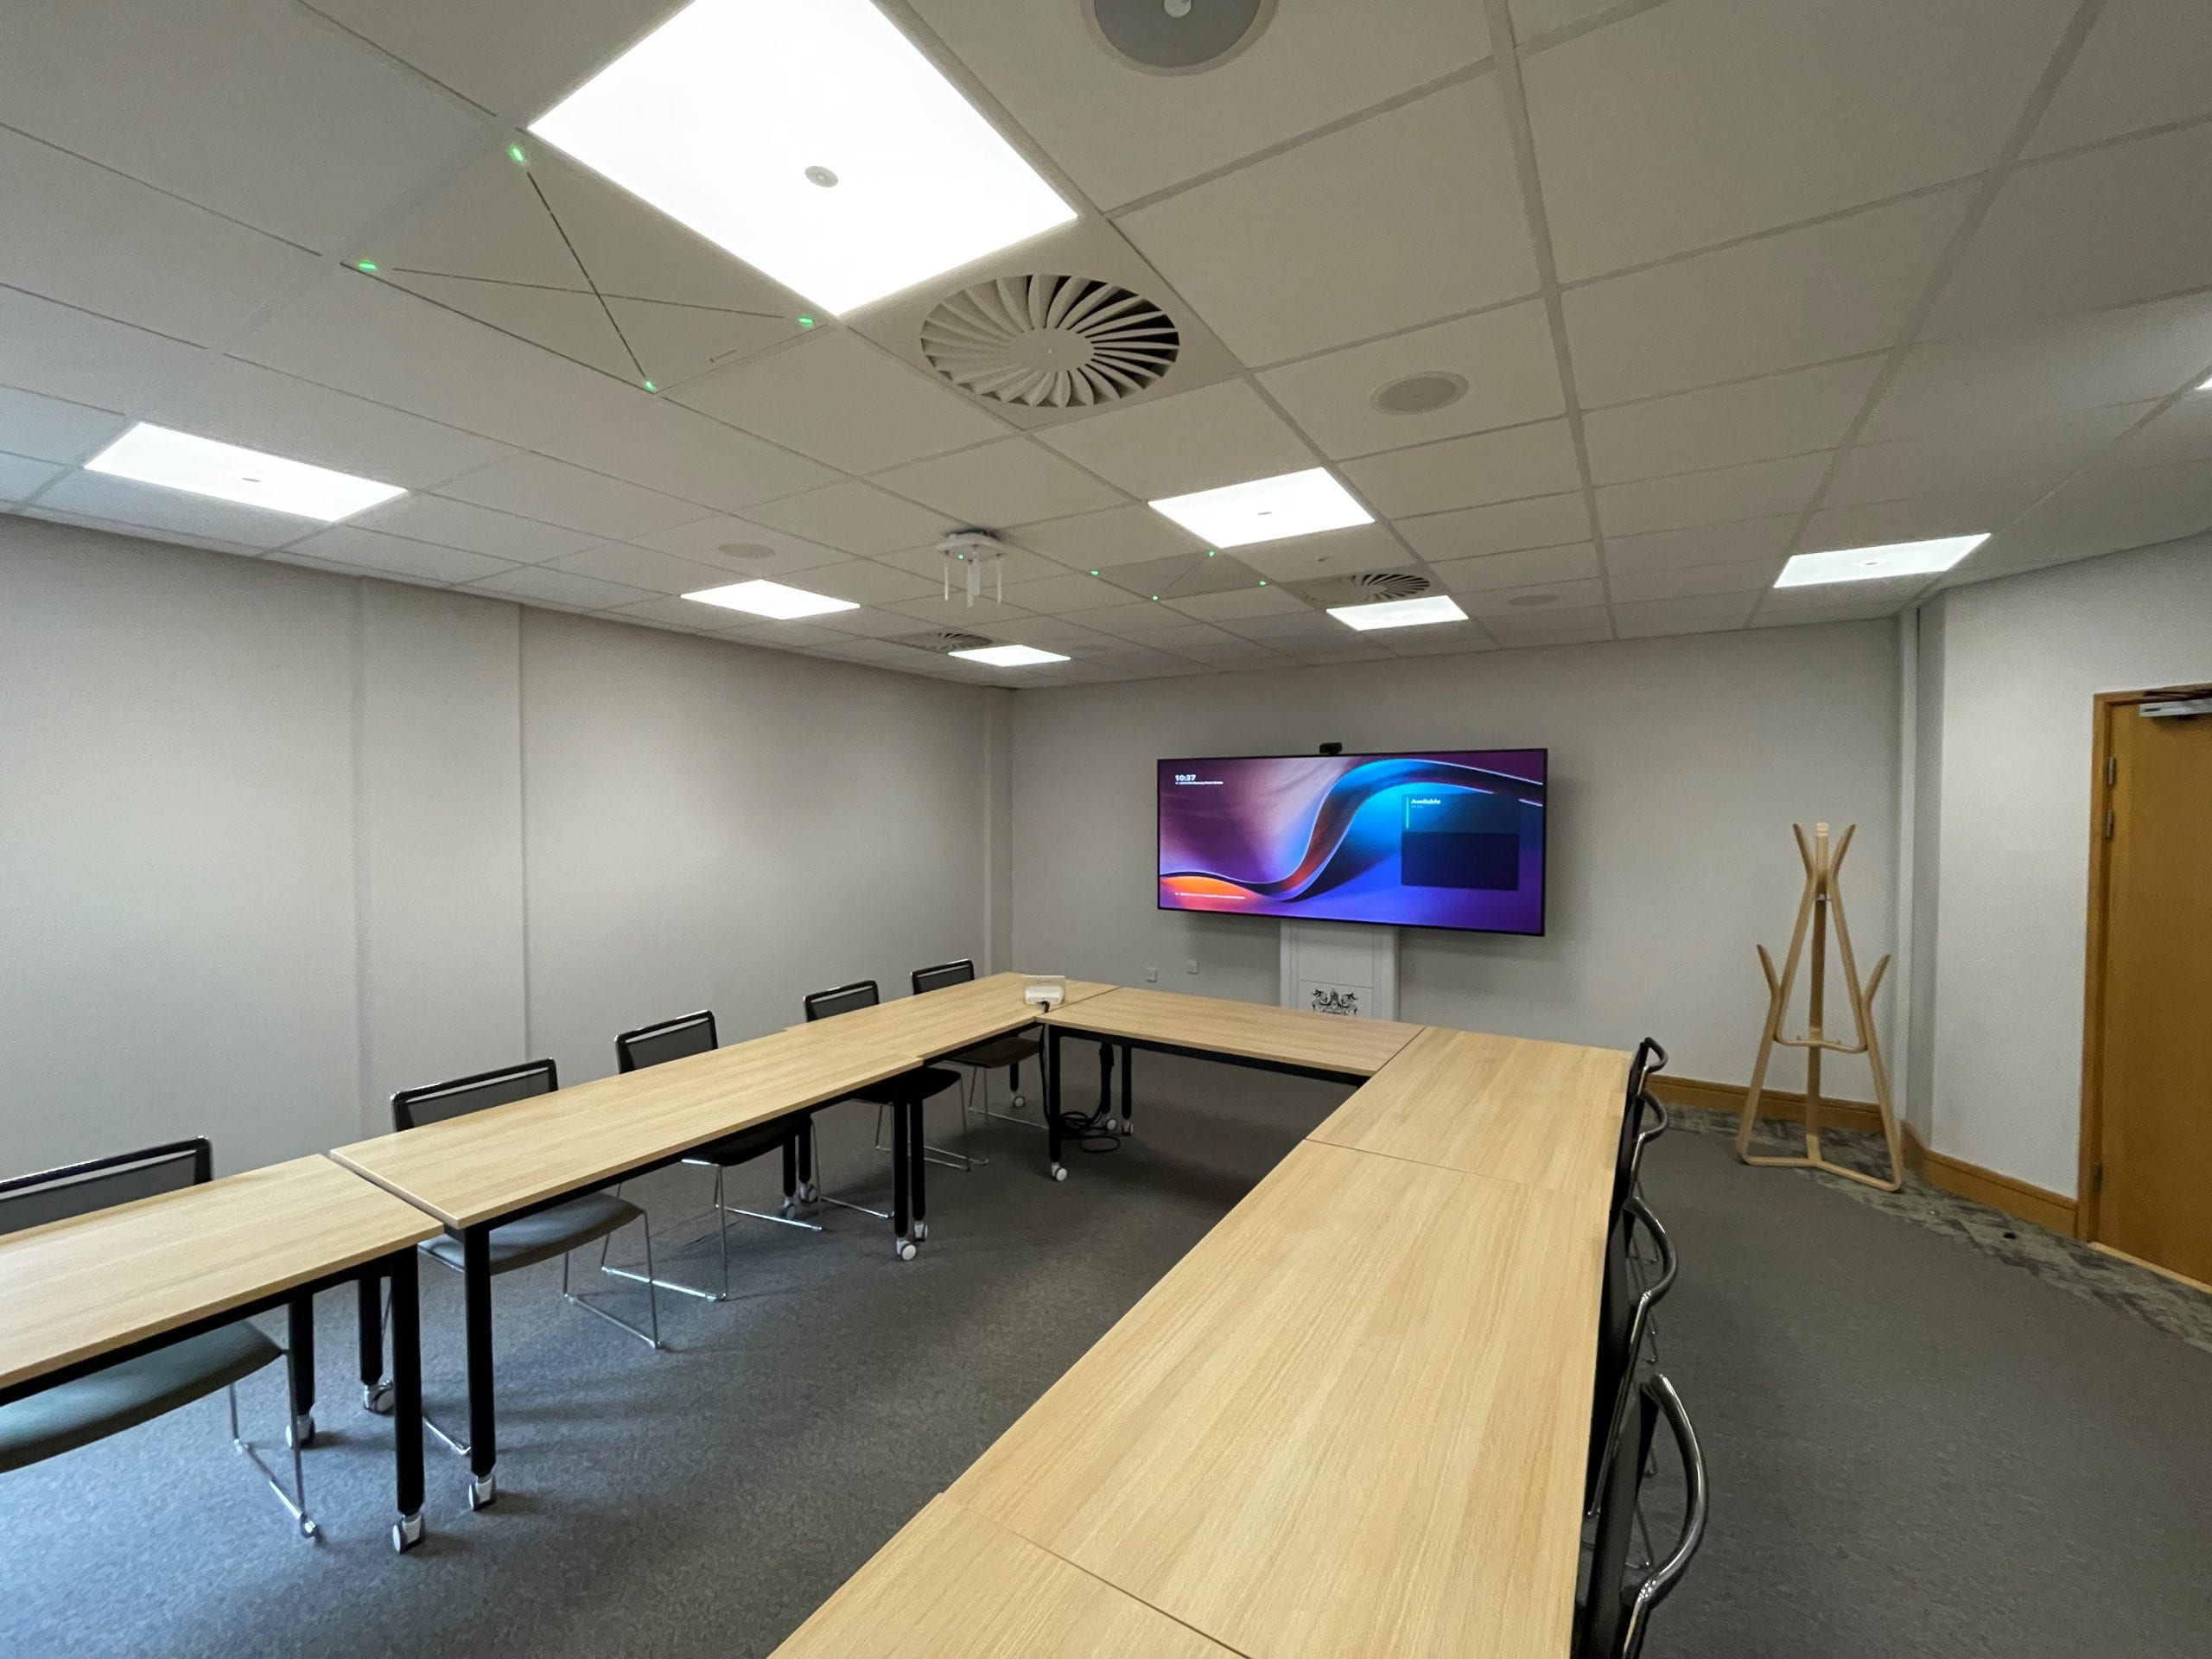 A photo of an upgraded meeting space in Lawress Hall with widescreen monitor and built in microphones in the ceiling.